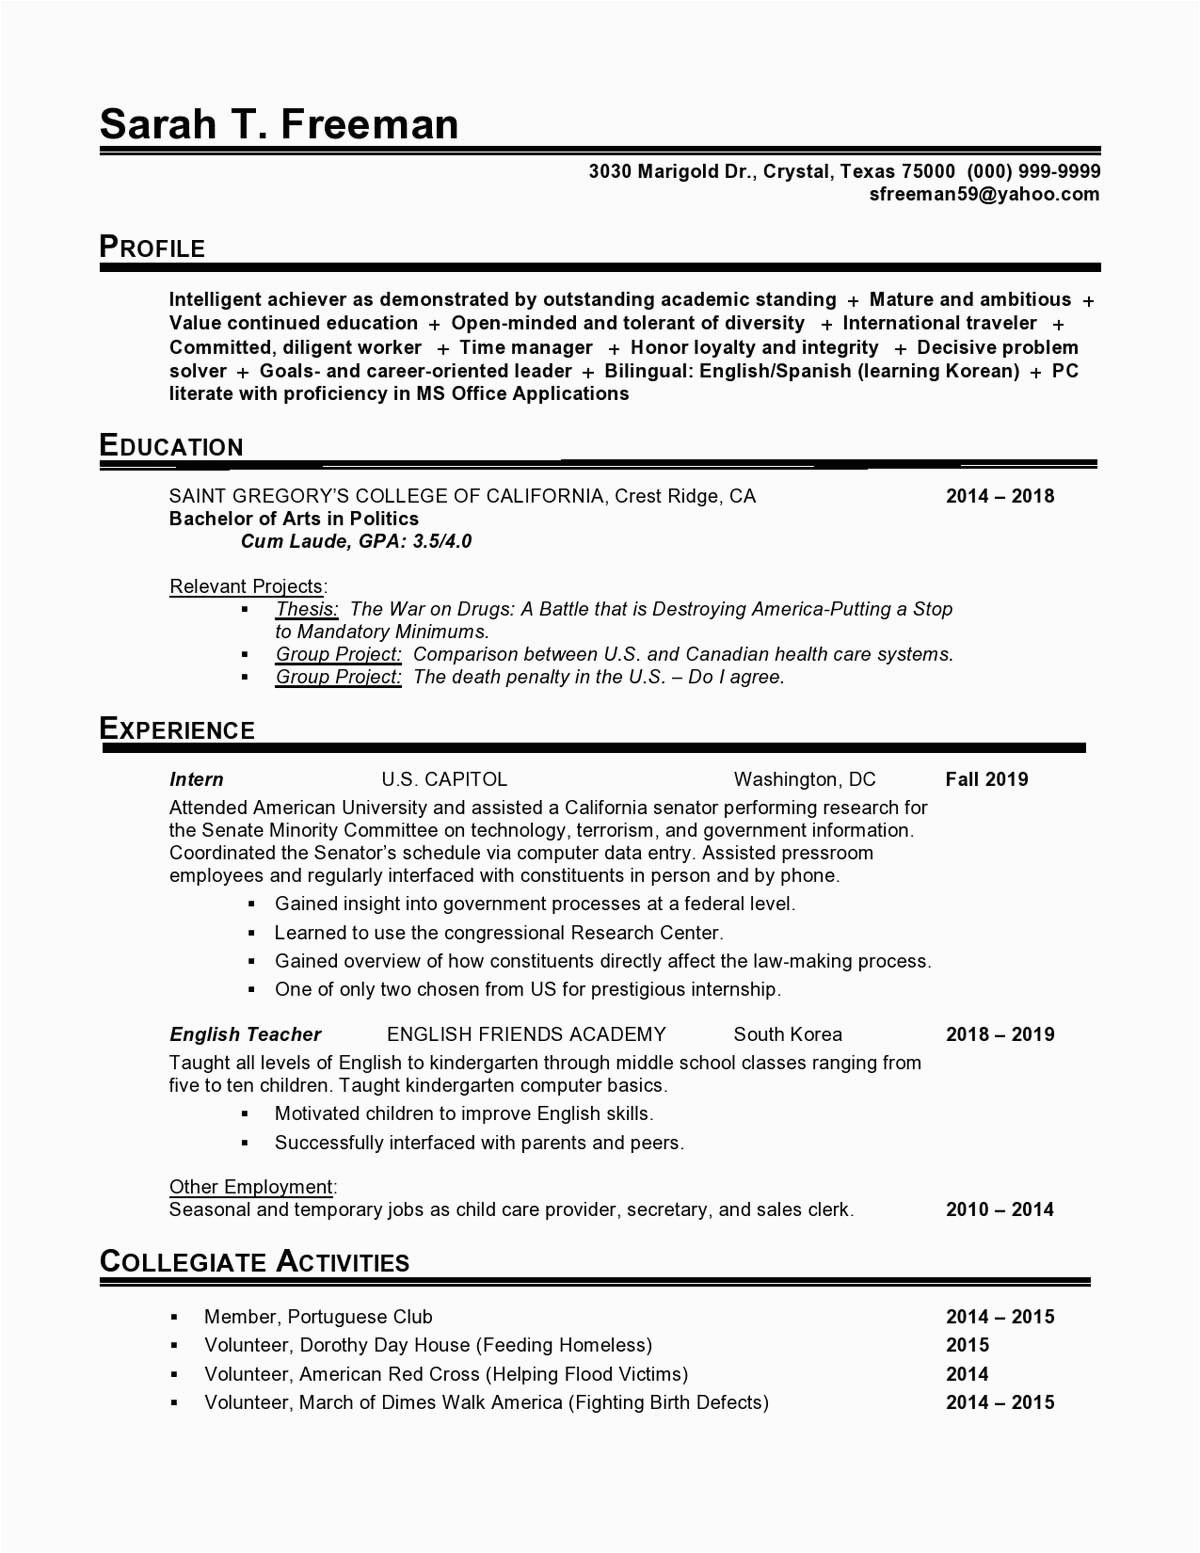 Sample Resume for Government Employee Philippines Government Entry Level Resume Samples Templates